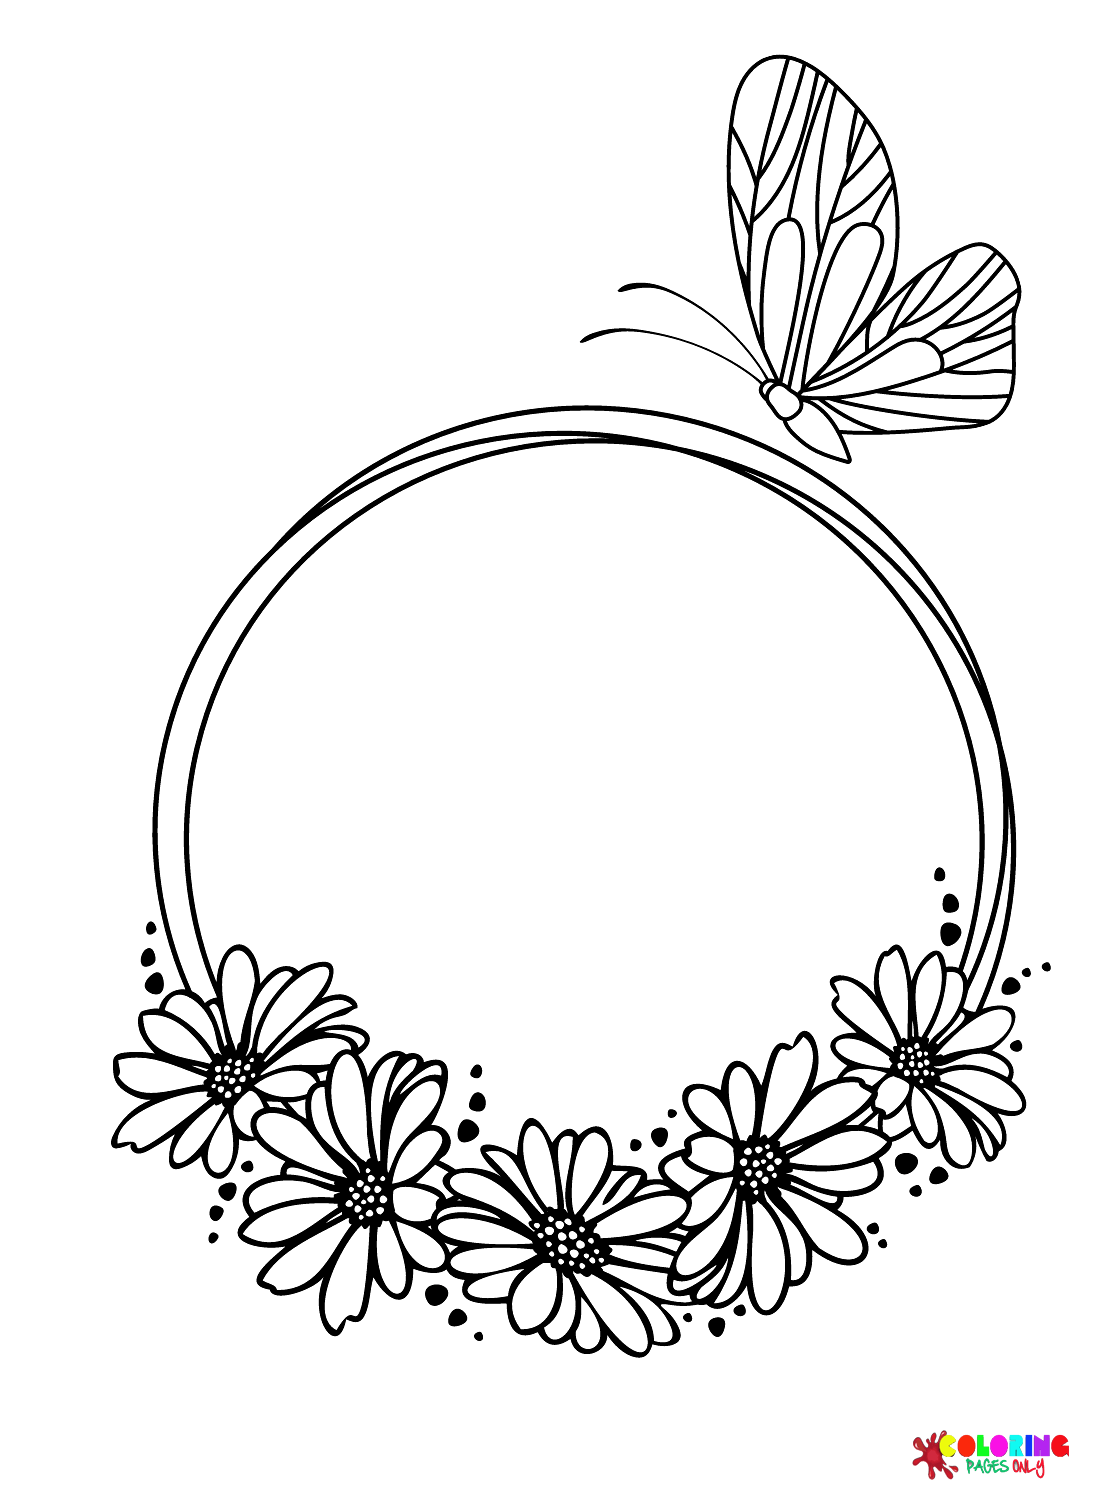 Daisy Flower Wreath Coloring Page